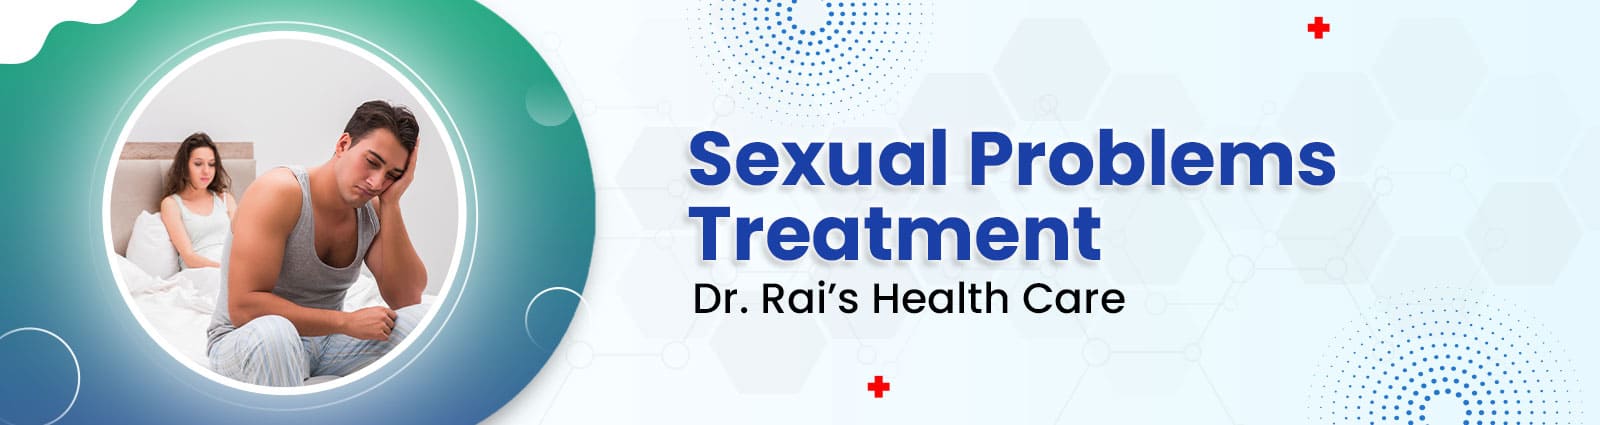 Sexual Problems Treatment